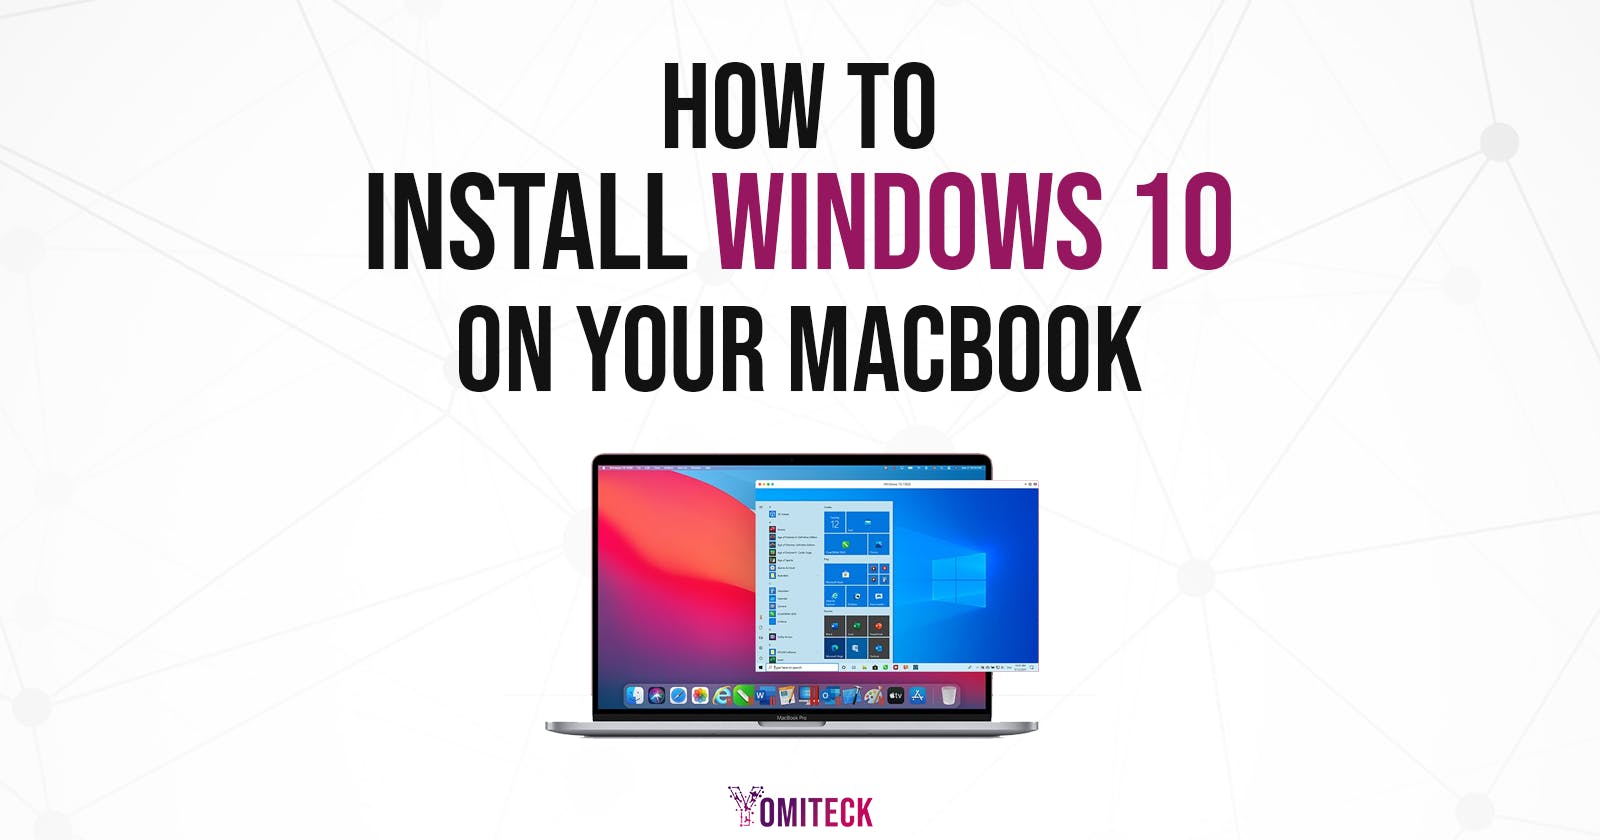 Detailed steps on how to add windows 10 to your MacBook